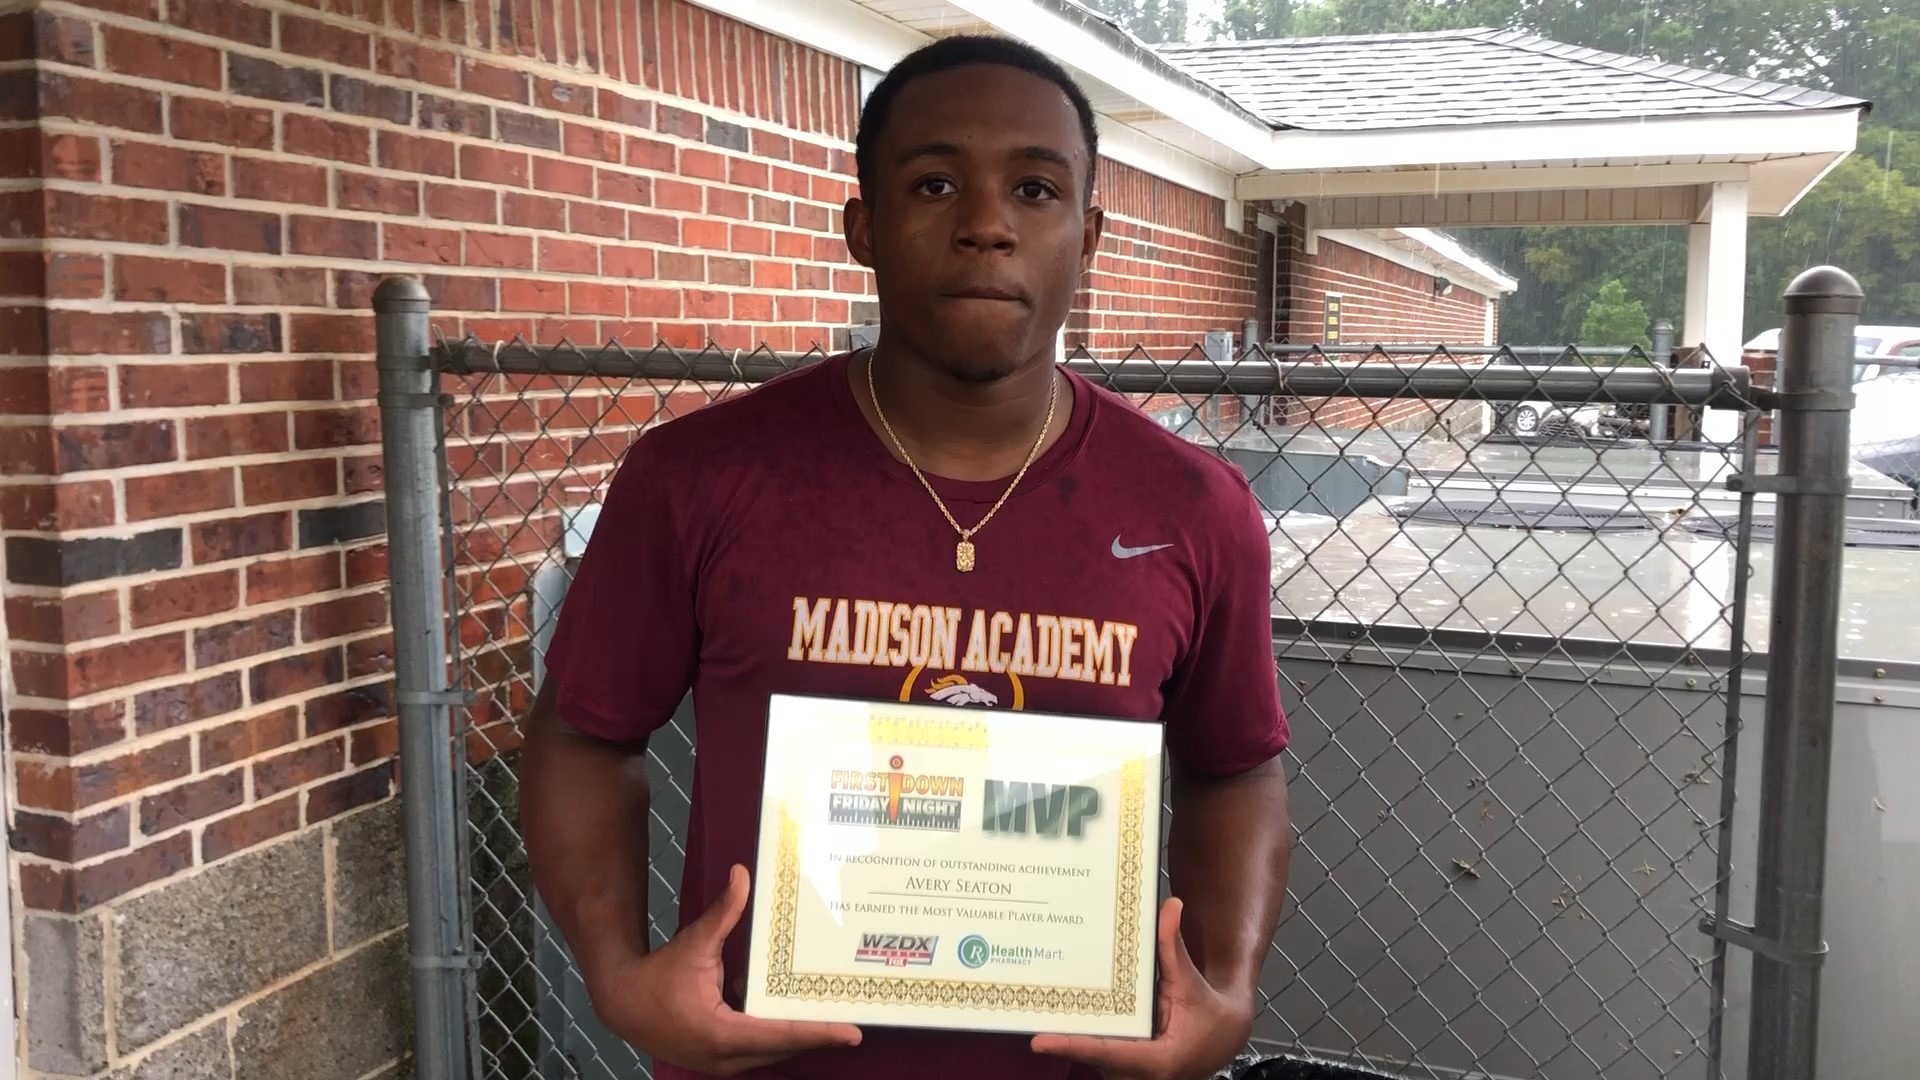 Last week, Madison Academy QB Avery Seaton scored 5 total TDs against Westminster Christian. For his efforts, Seaton is our newest FDFN MVP of the Week.